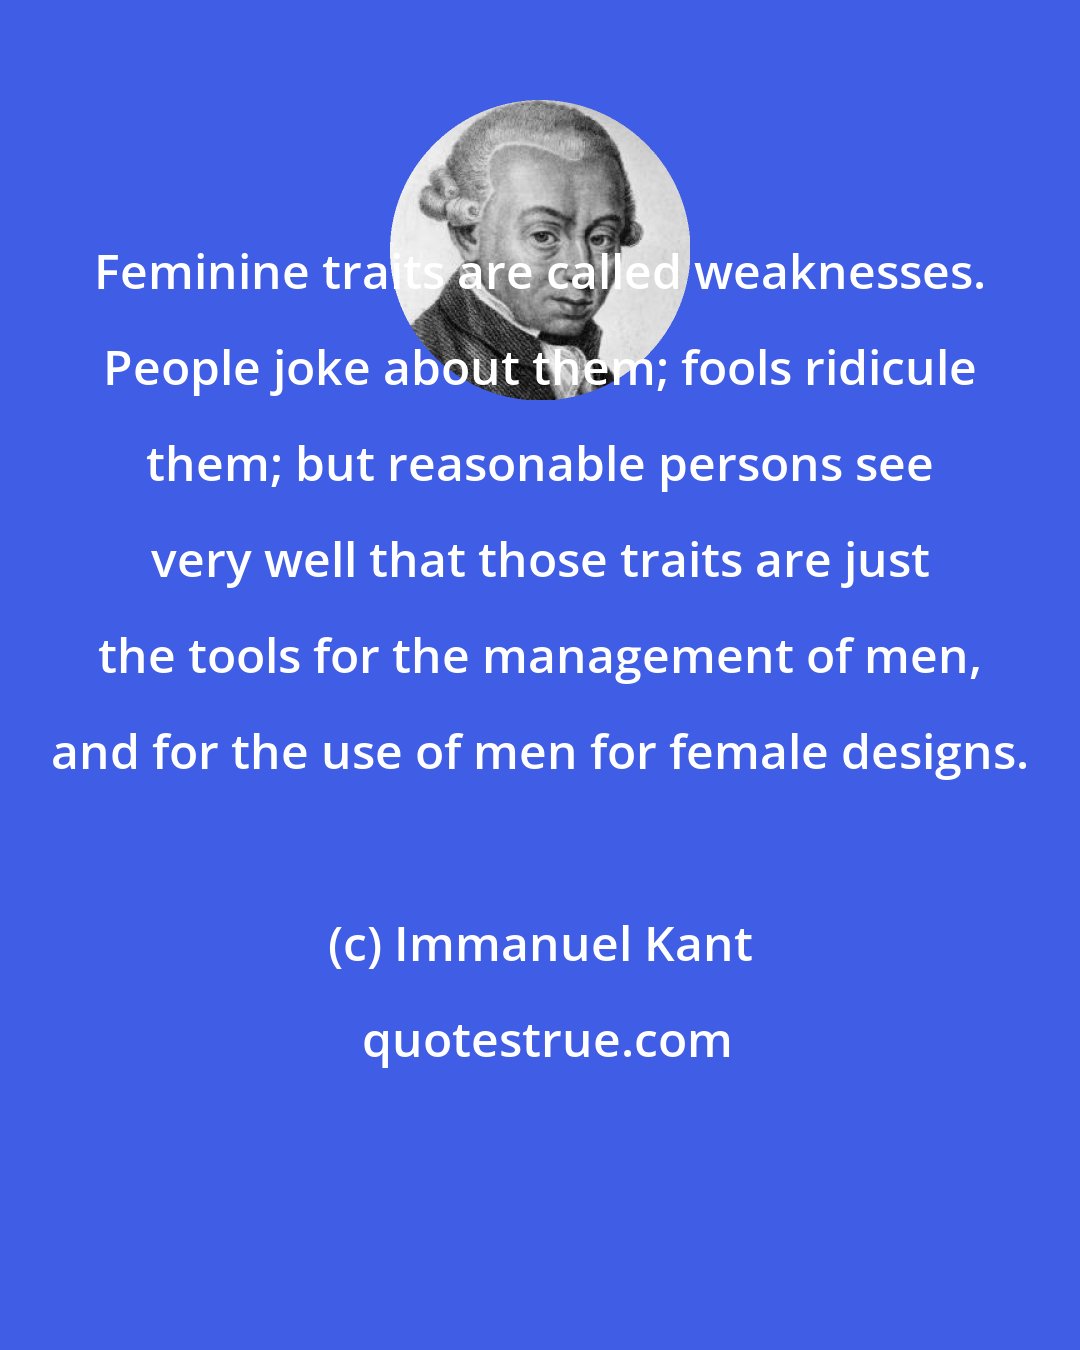 Immanuel Kant: Feminine traits are called weaknesses. People joke about them; fools ridicule them; but reasonable persons see very well that those traits are just the tools for the management of men, and for the use of men for female designs.